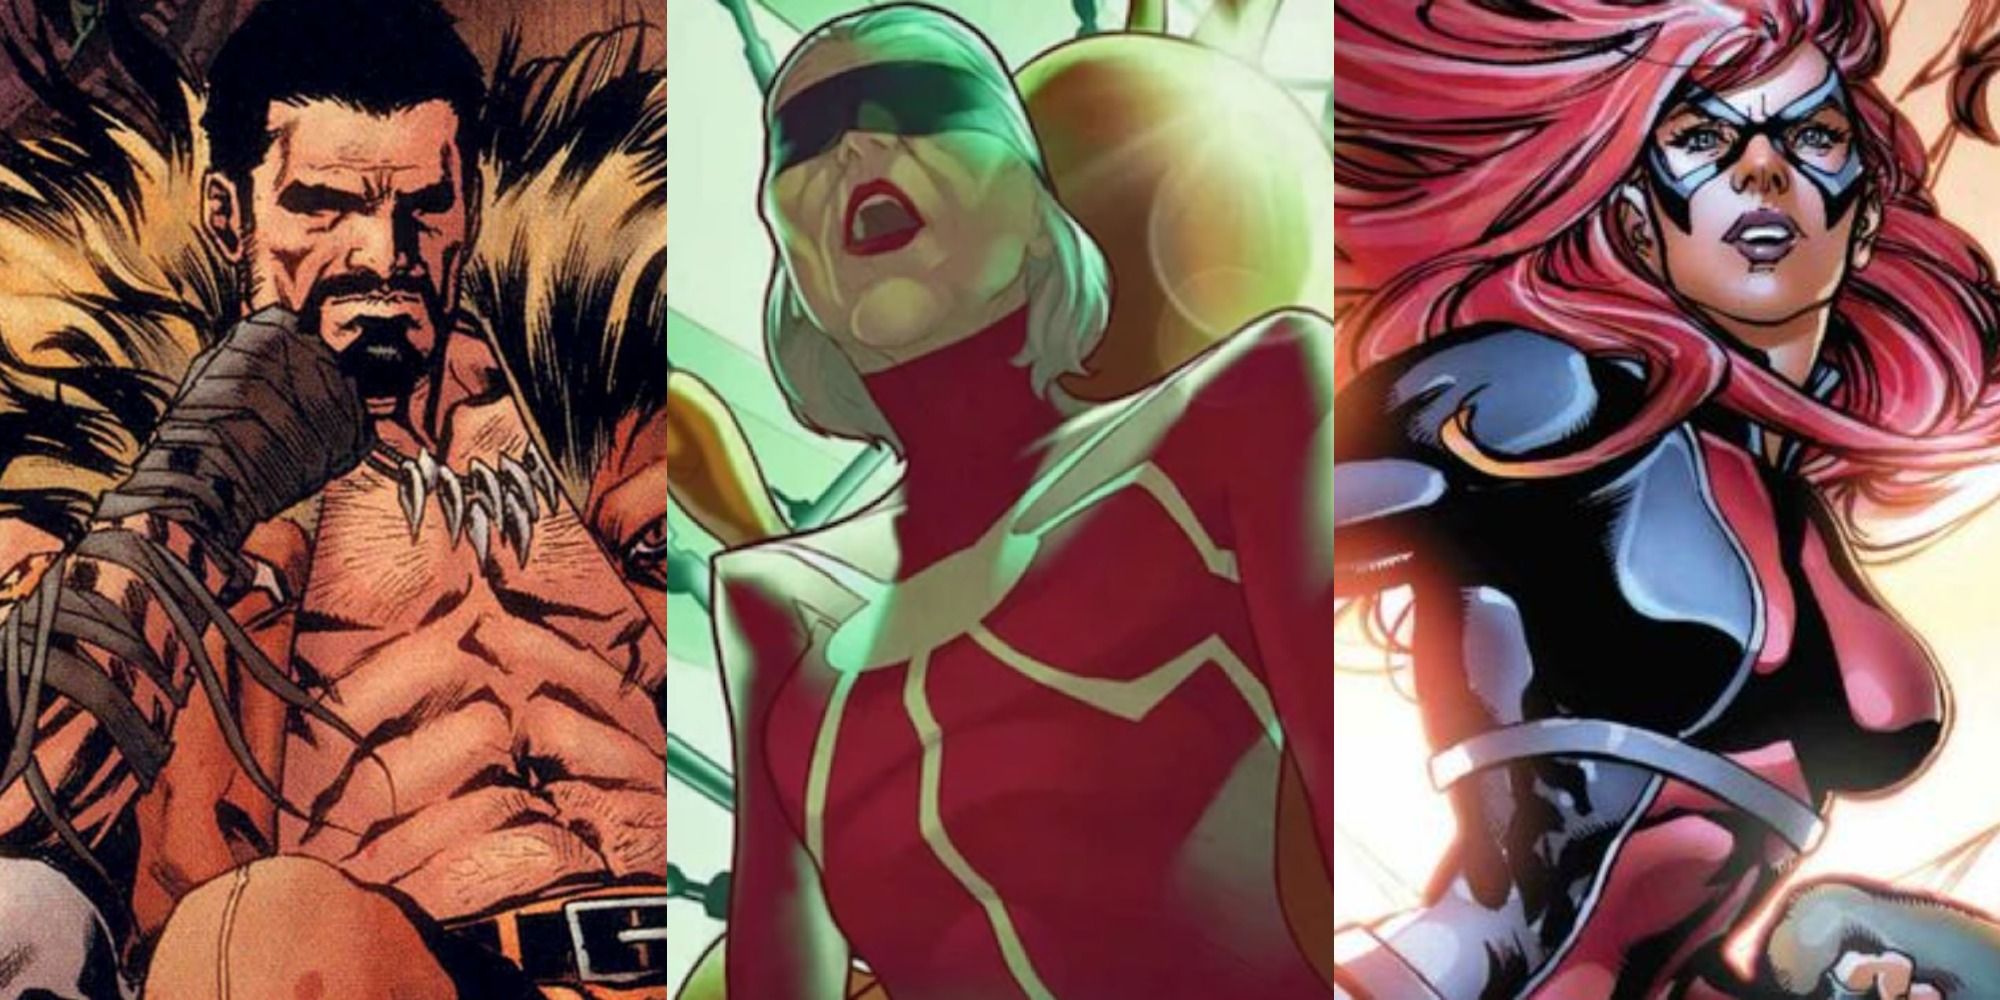 Split image showing Kraven the Hunter, Madame Web, and Jackpot in the comics